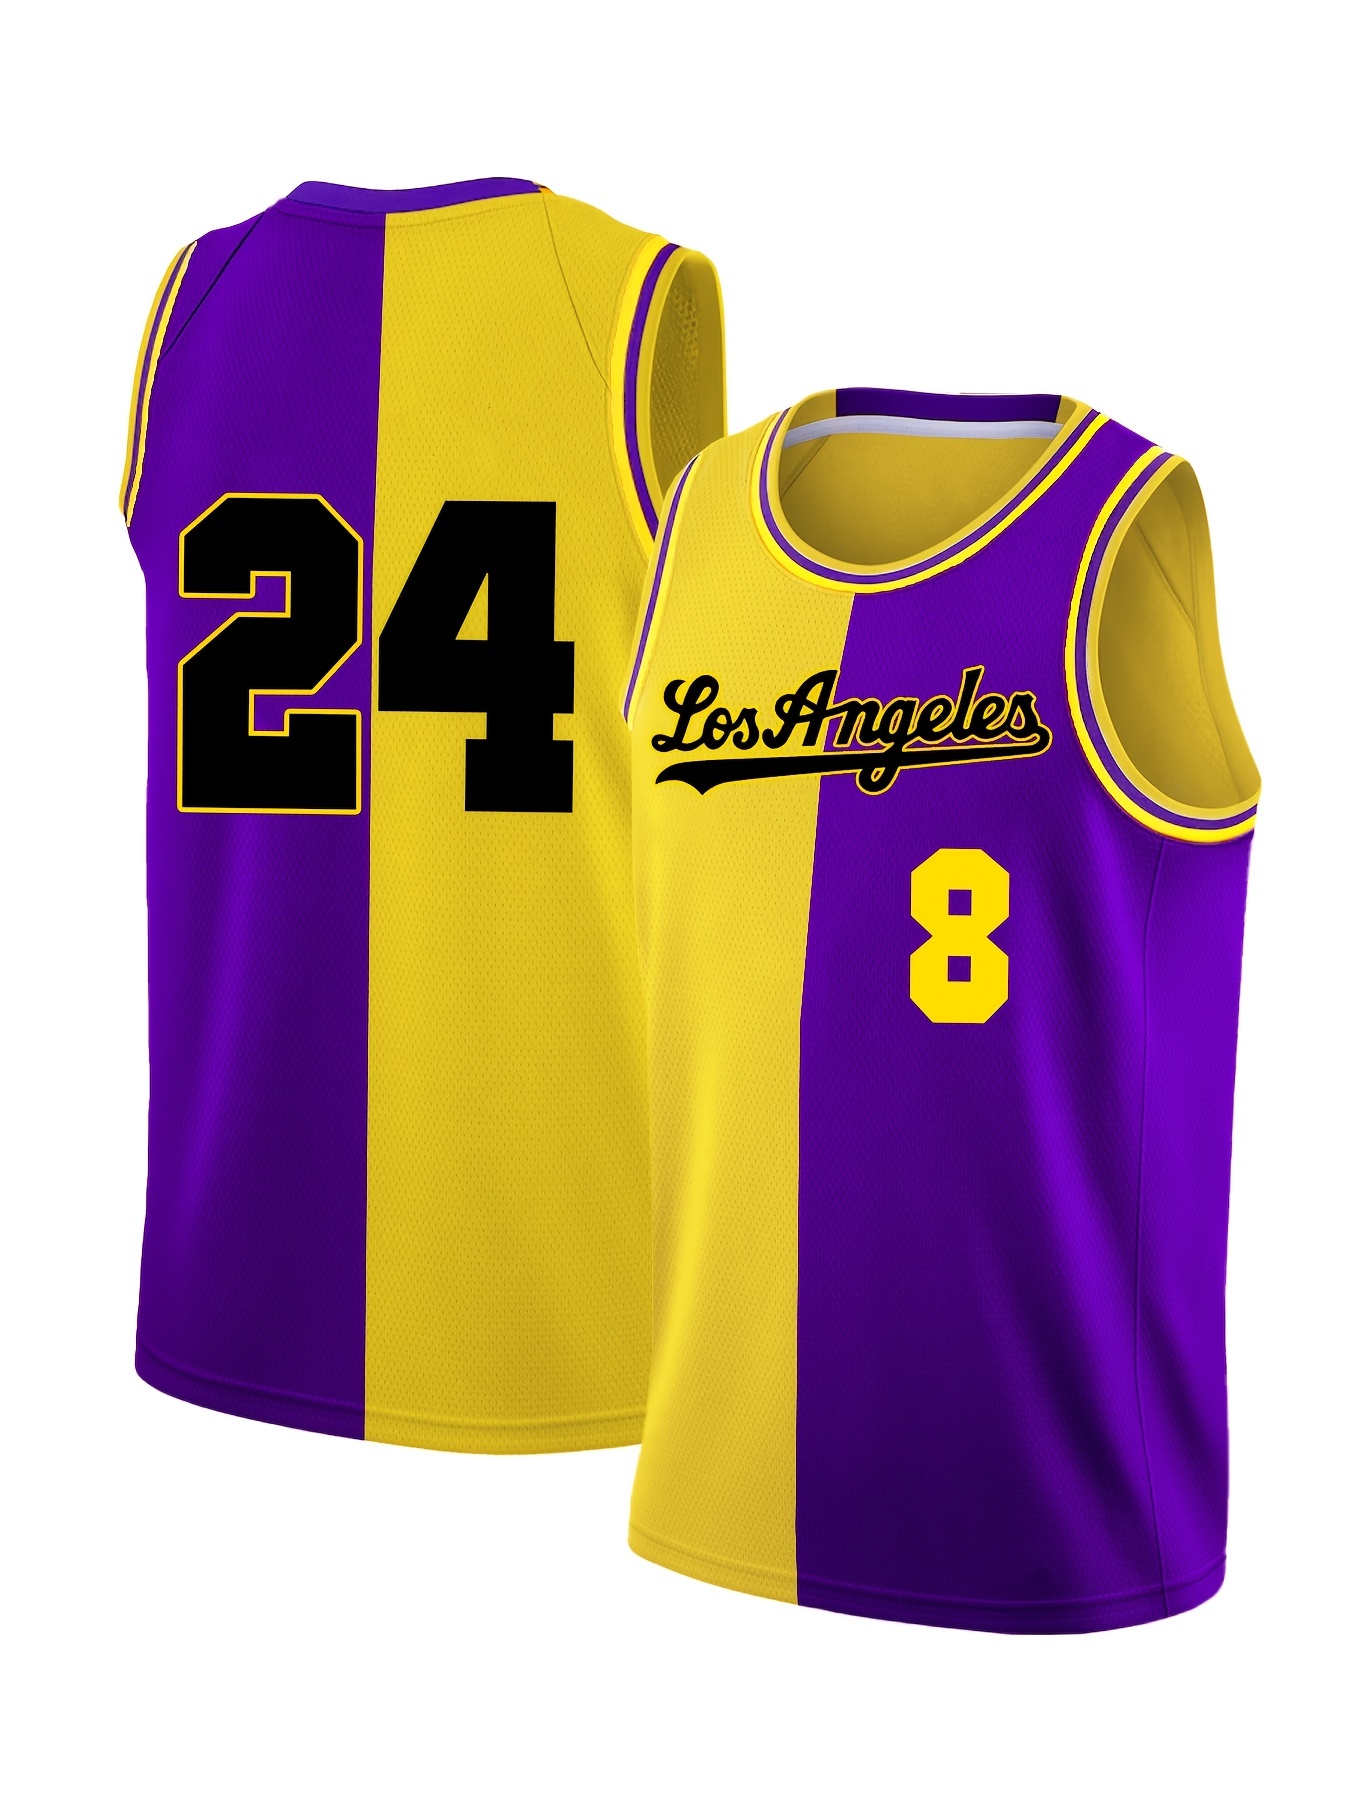 Temu Men's Los Angeles #824 Breathable Embroidery Basketball Jersey, Mens Vintage Round Neck Sleeveless Uniform Basketball Shirt for Training